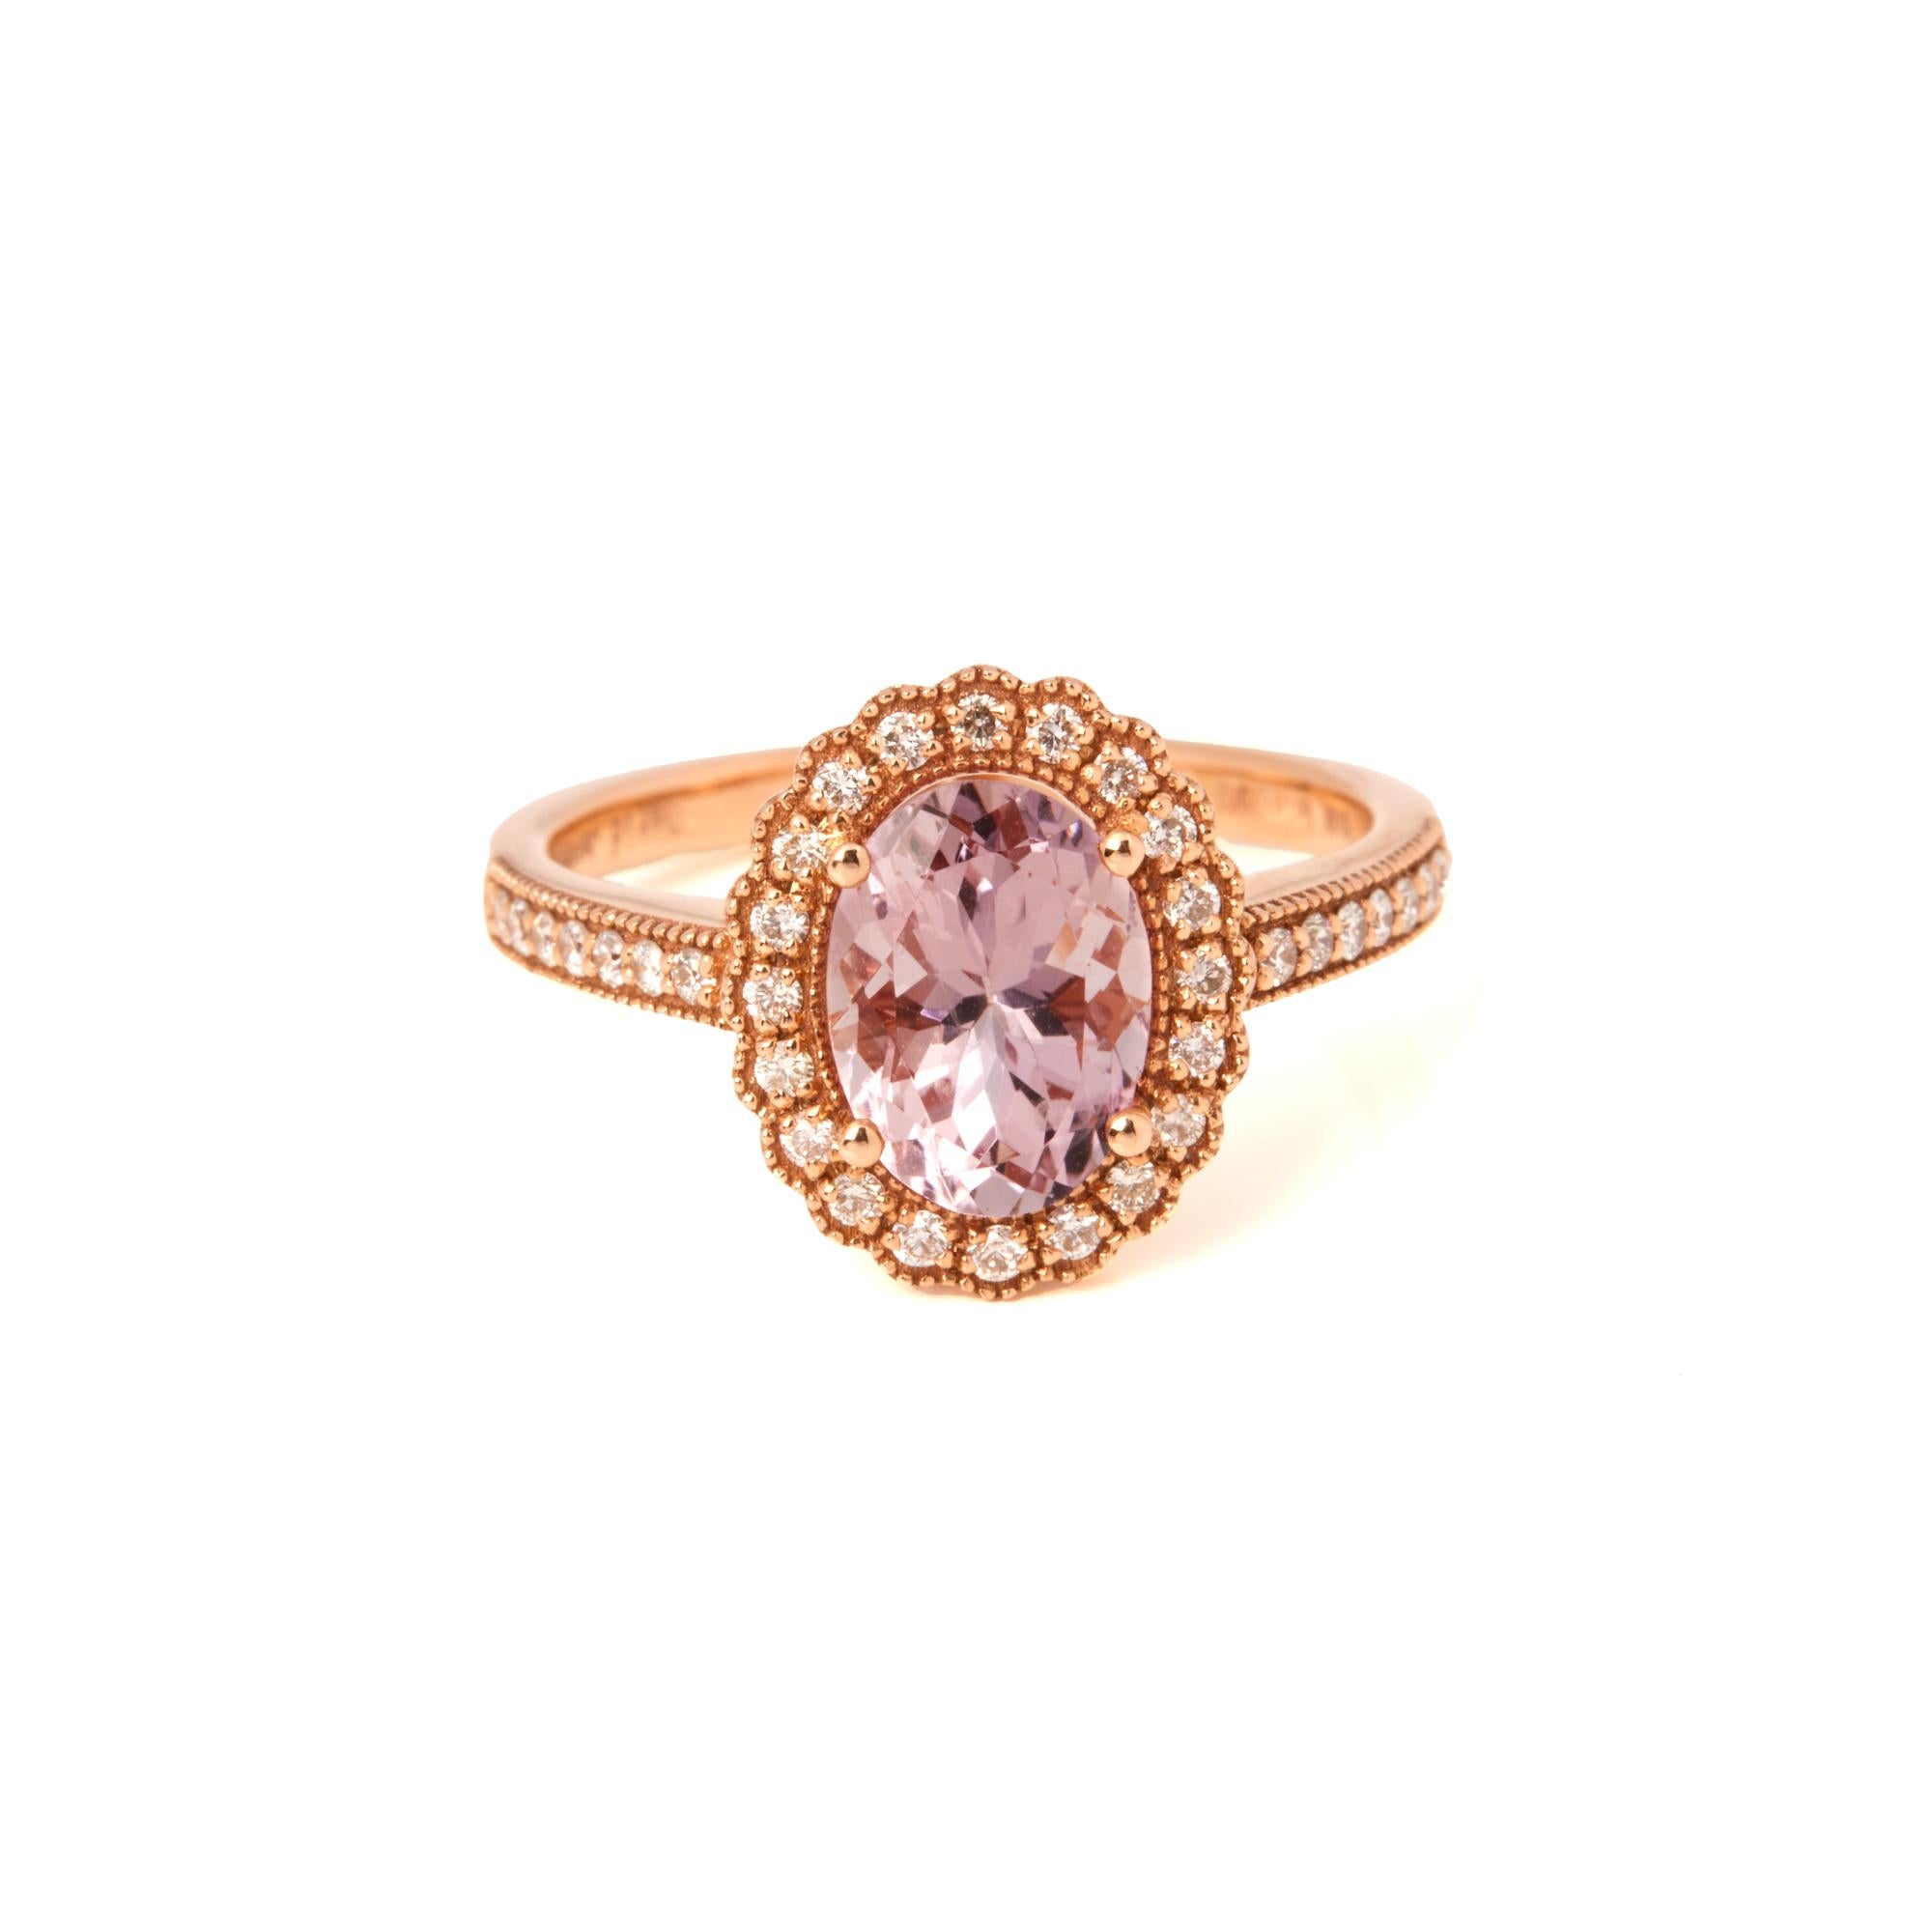 This ring is from the private collection of gemstone jewellery individually designed by David Jerome. It features an oval cut morganite set with diamonds. Accompanied by a IGITL gem certificate. UK ring size N. EU ring size 54. US ring size 7. 